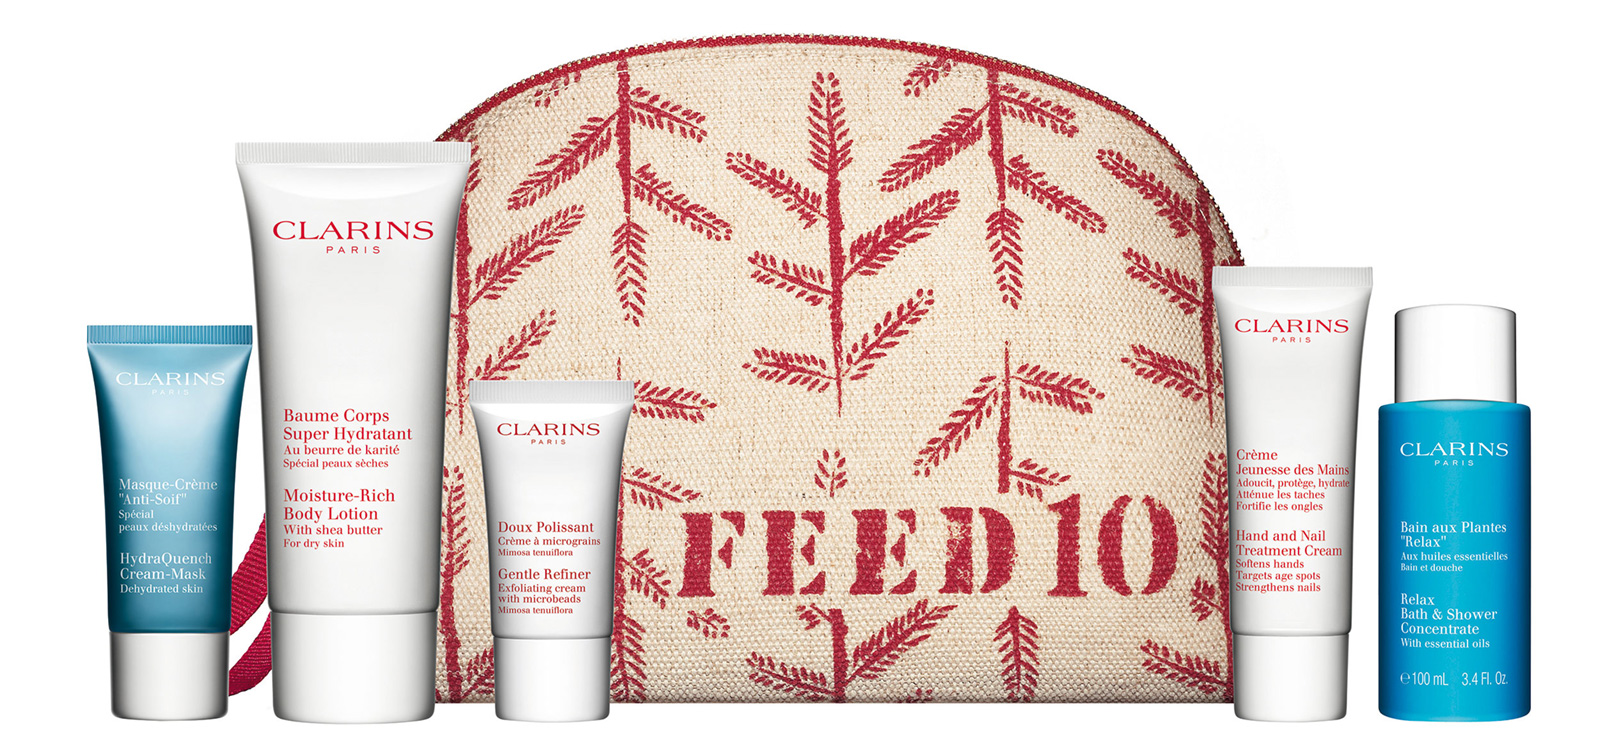 FEED for Clarins pouch